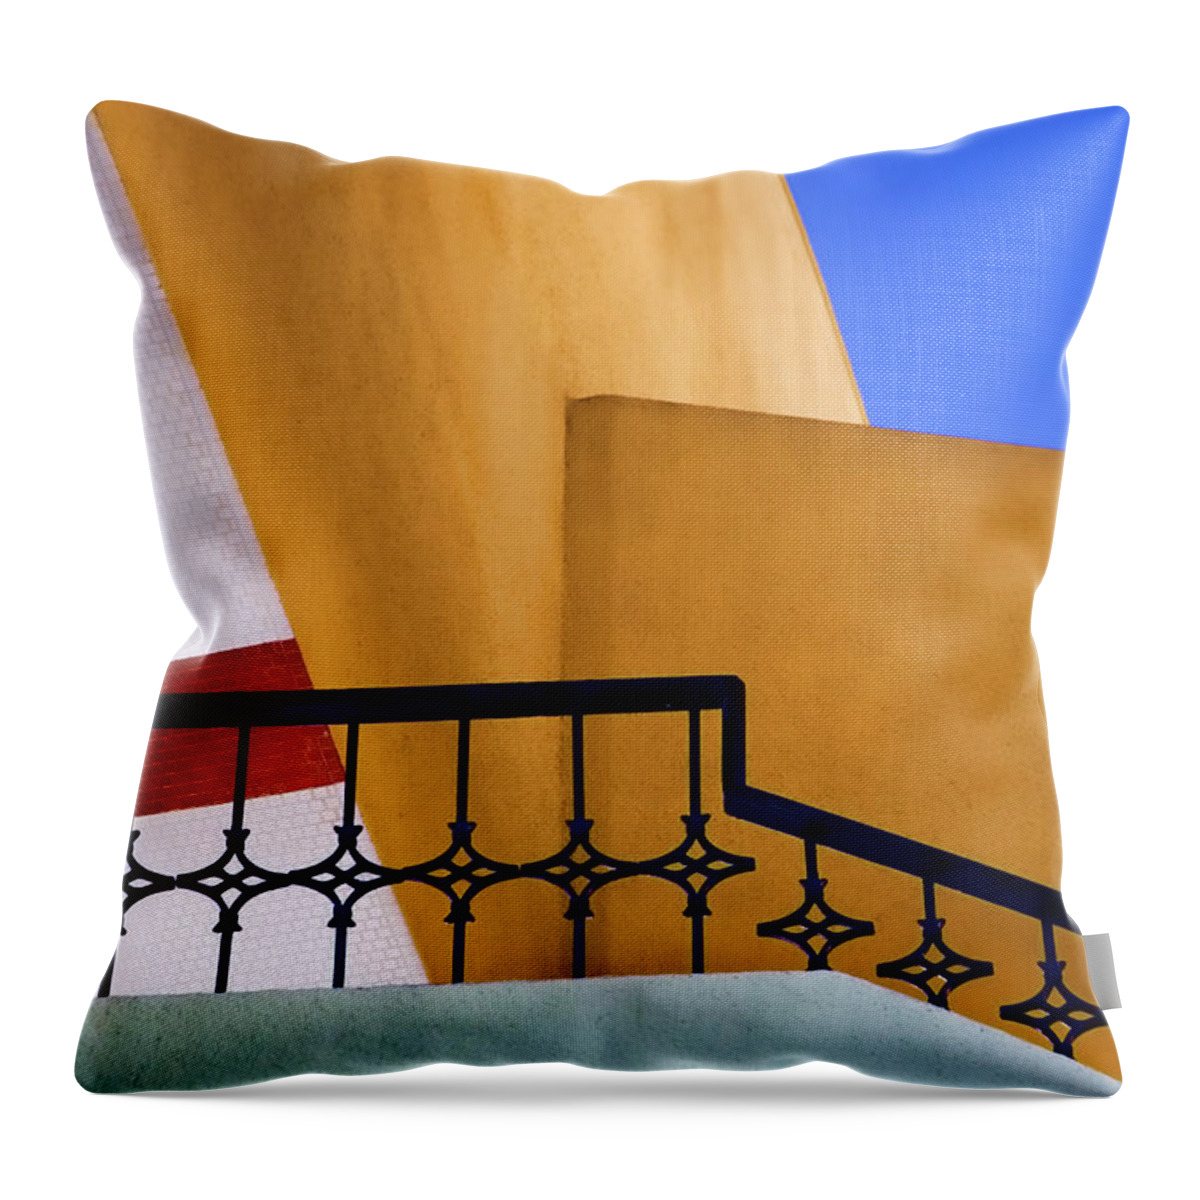 Architecture Throw Pillow featuring the photograph Architectural Detail #3 by Carol Leigh